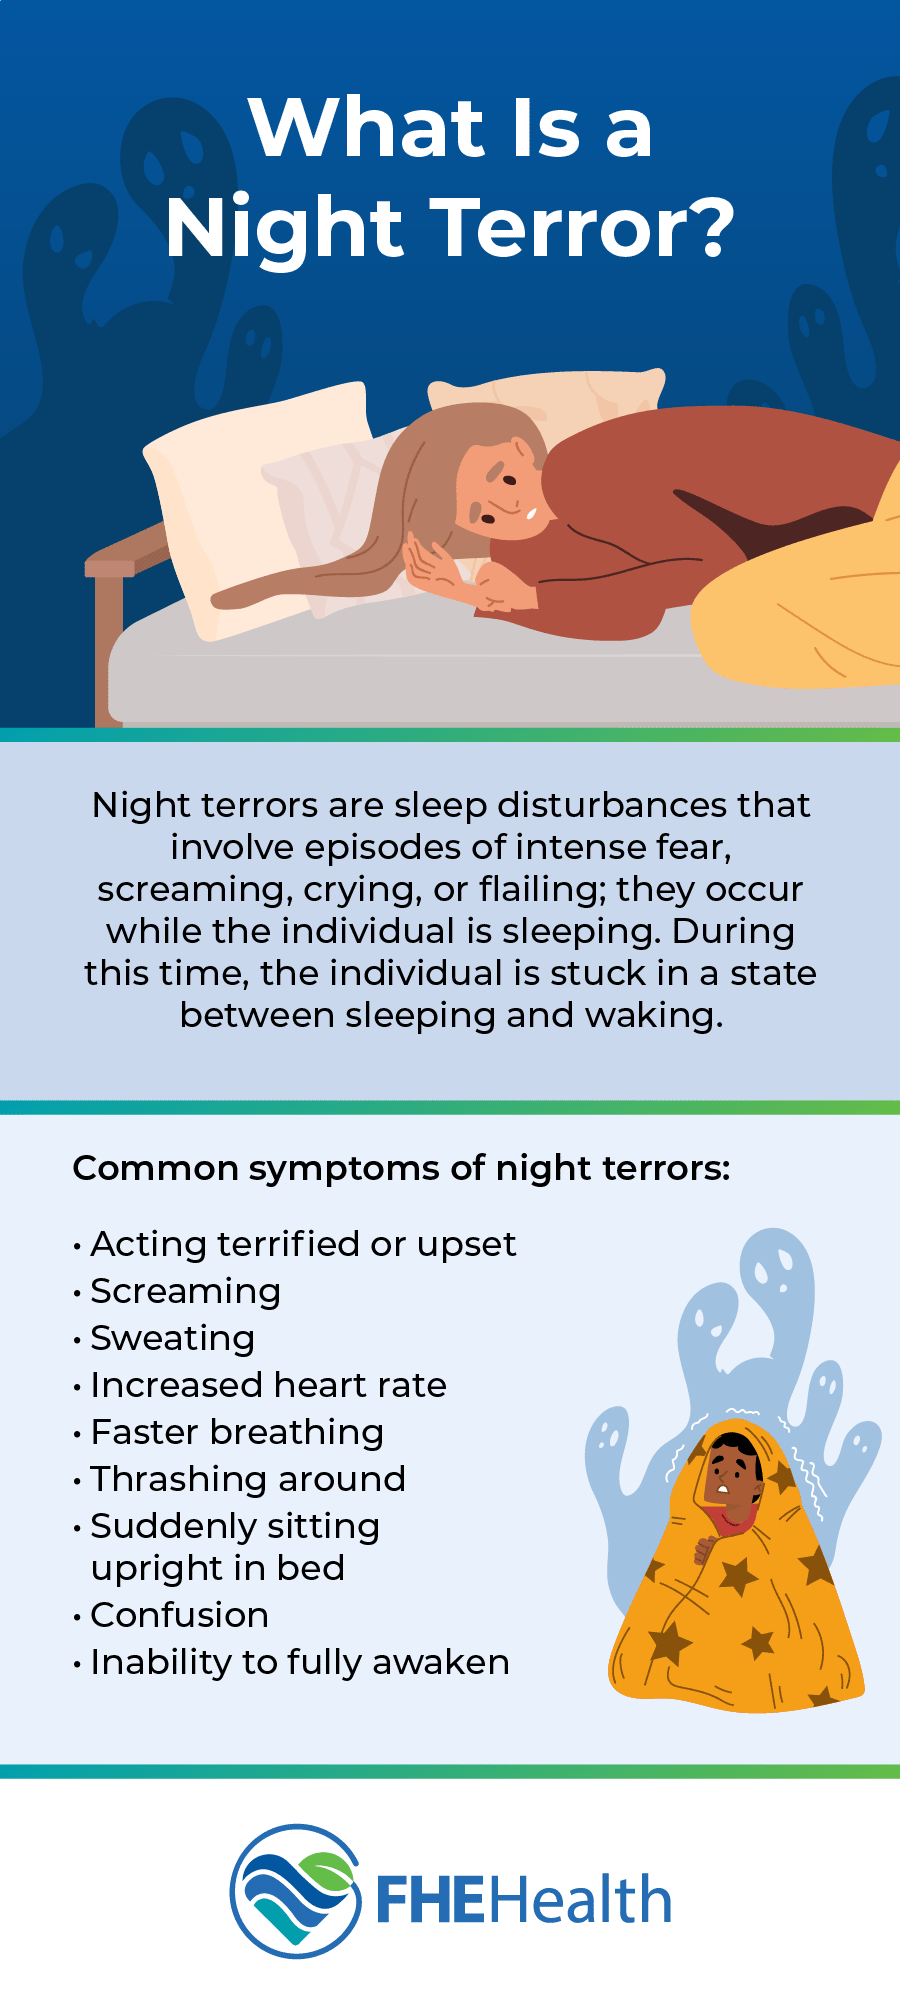 Chronic and Acute Night Terrors and Their Treatments